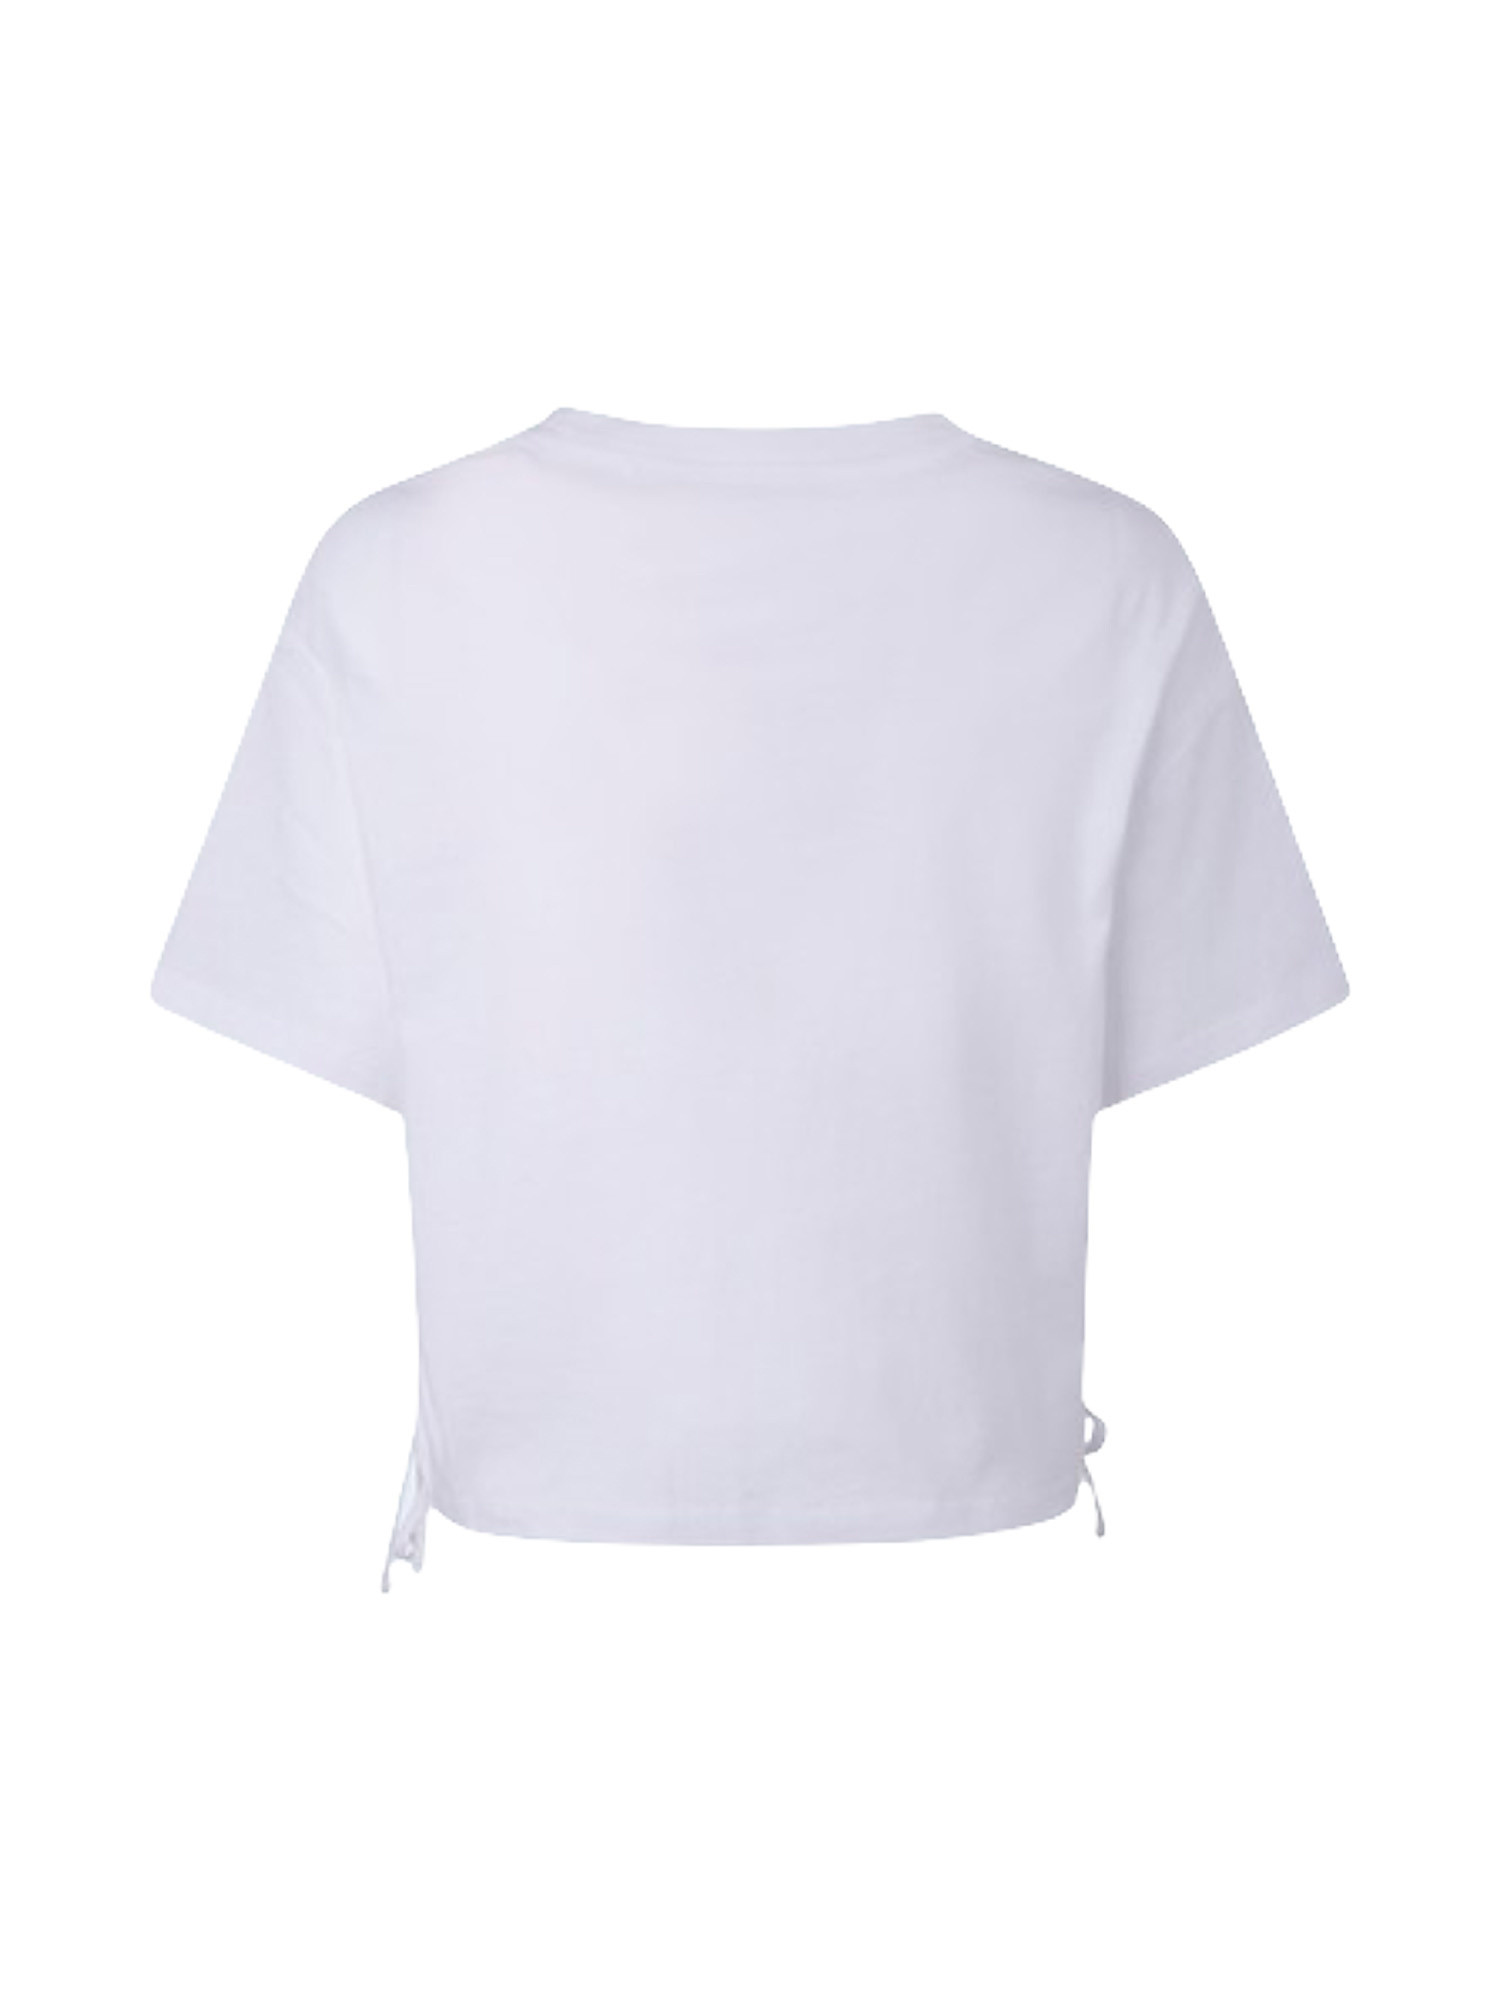 T-shirt con logo sul petto cara, Bianco, large image number 1